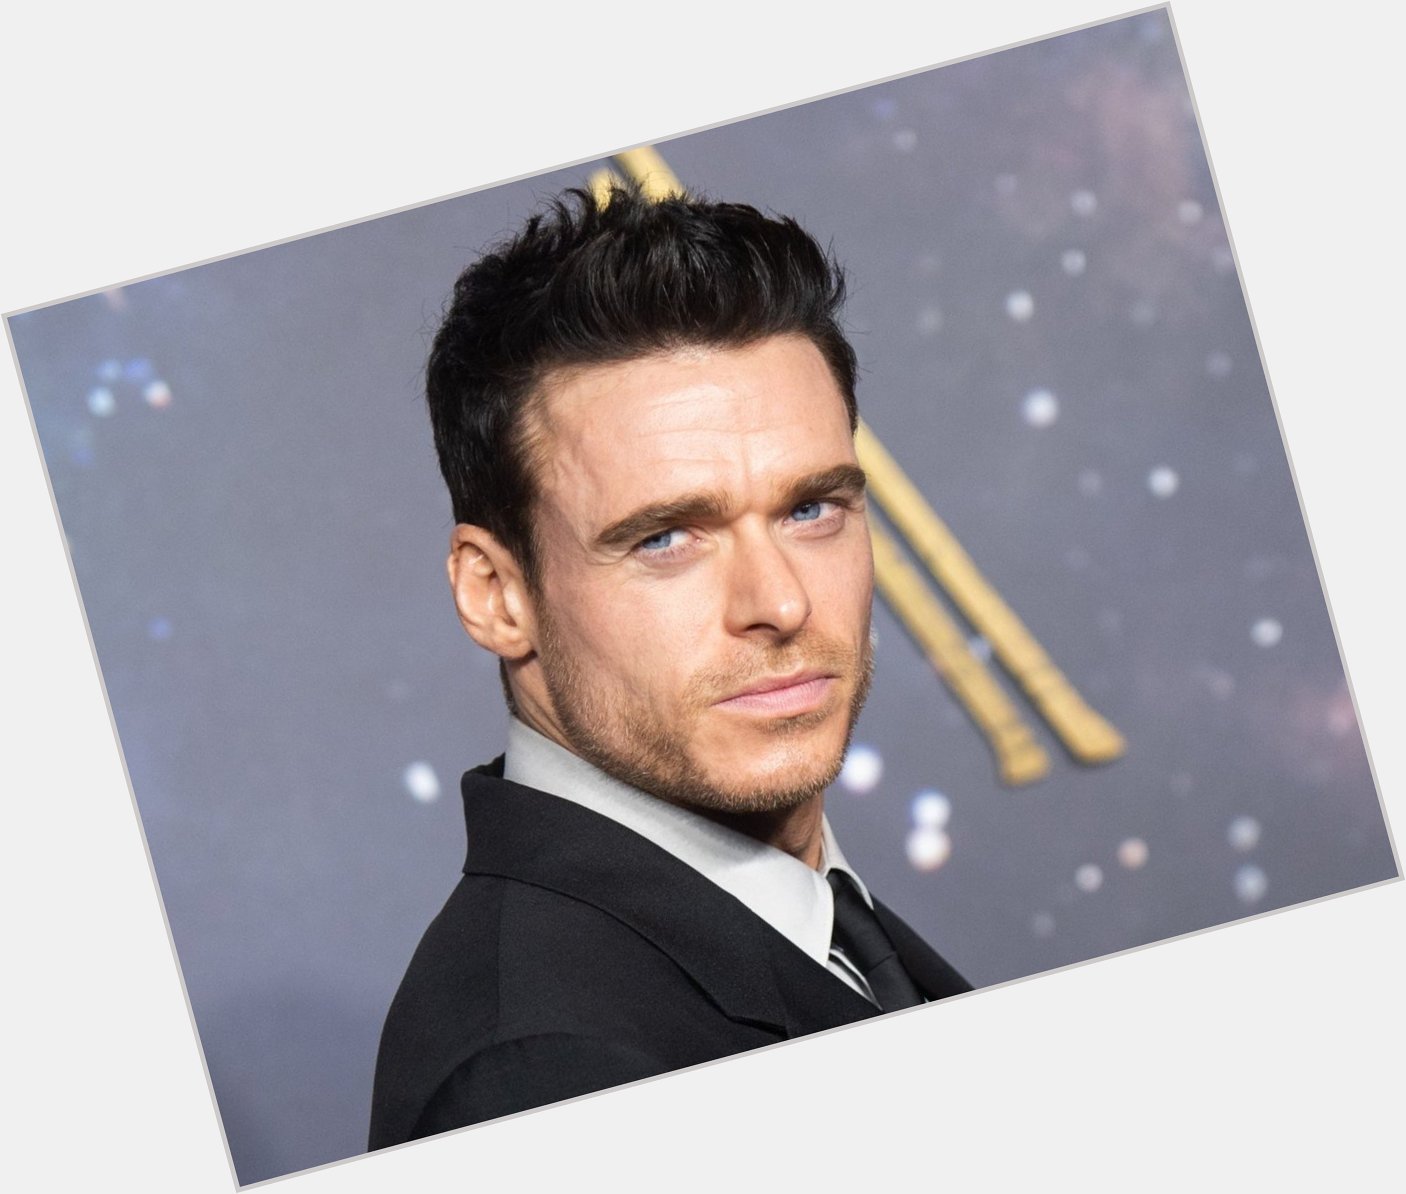 Happy birthday to the handsome Richard Madden! He is the actor who plays Ikaris in the MCU 